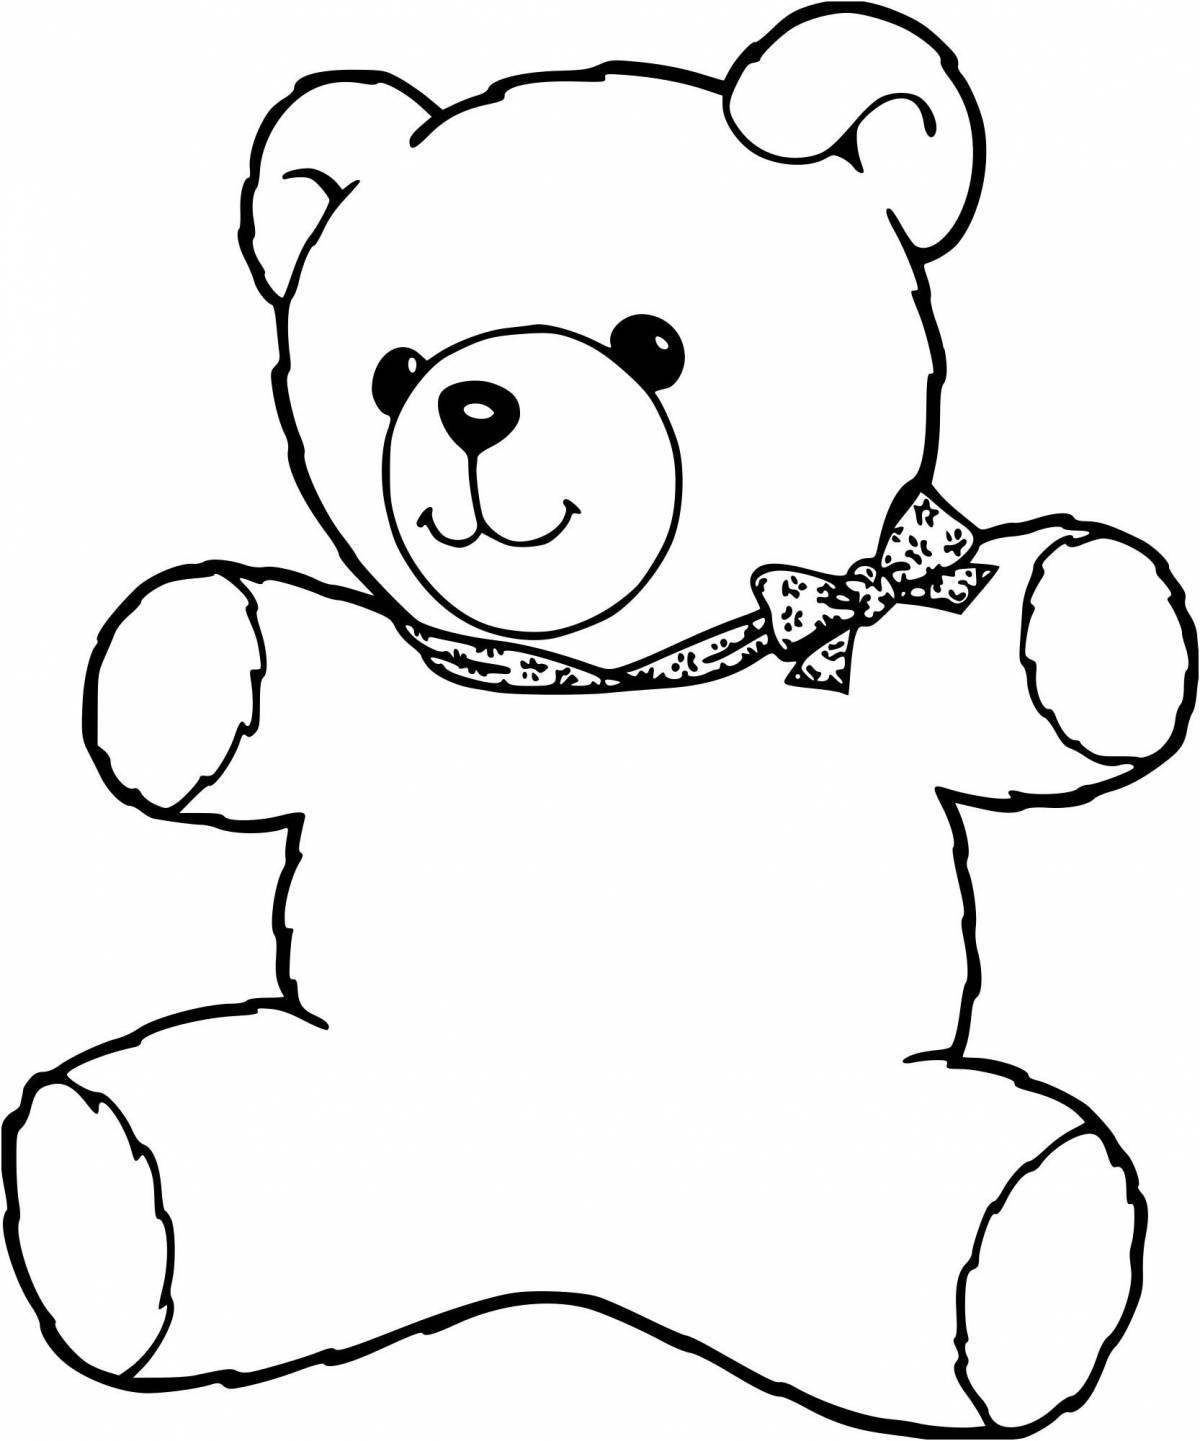 Colorful bear with a bow